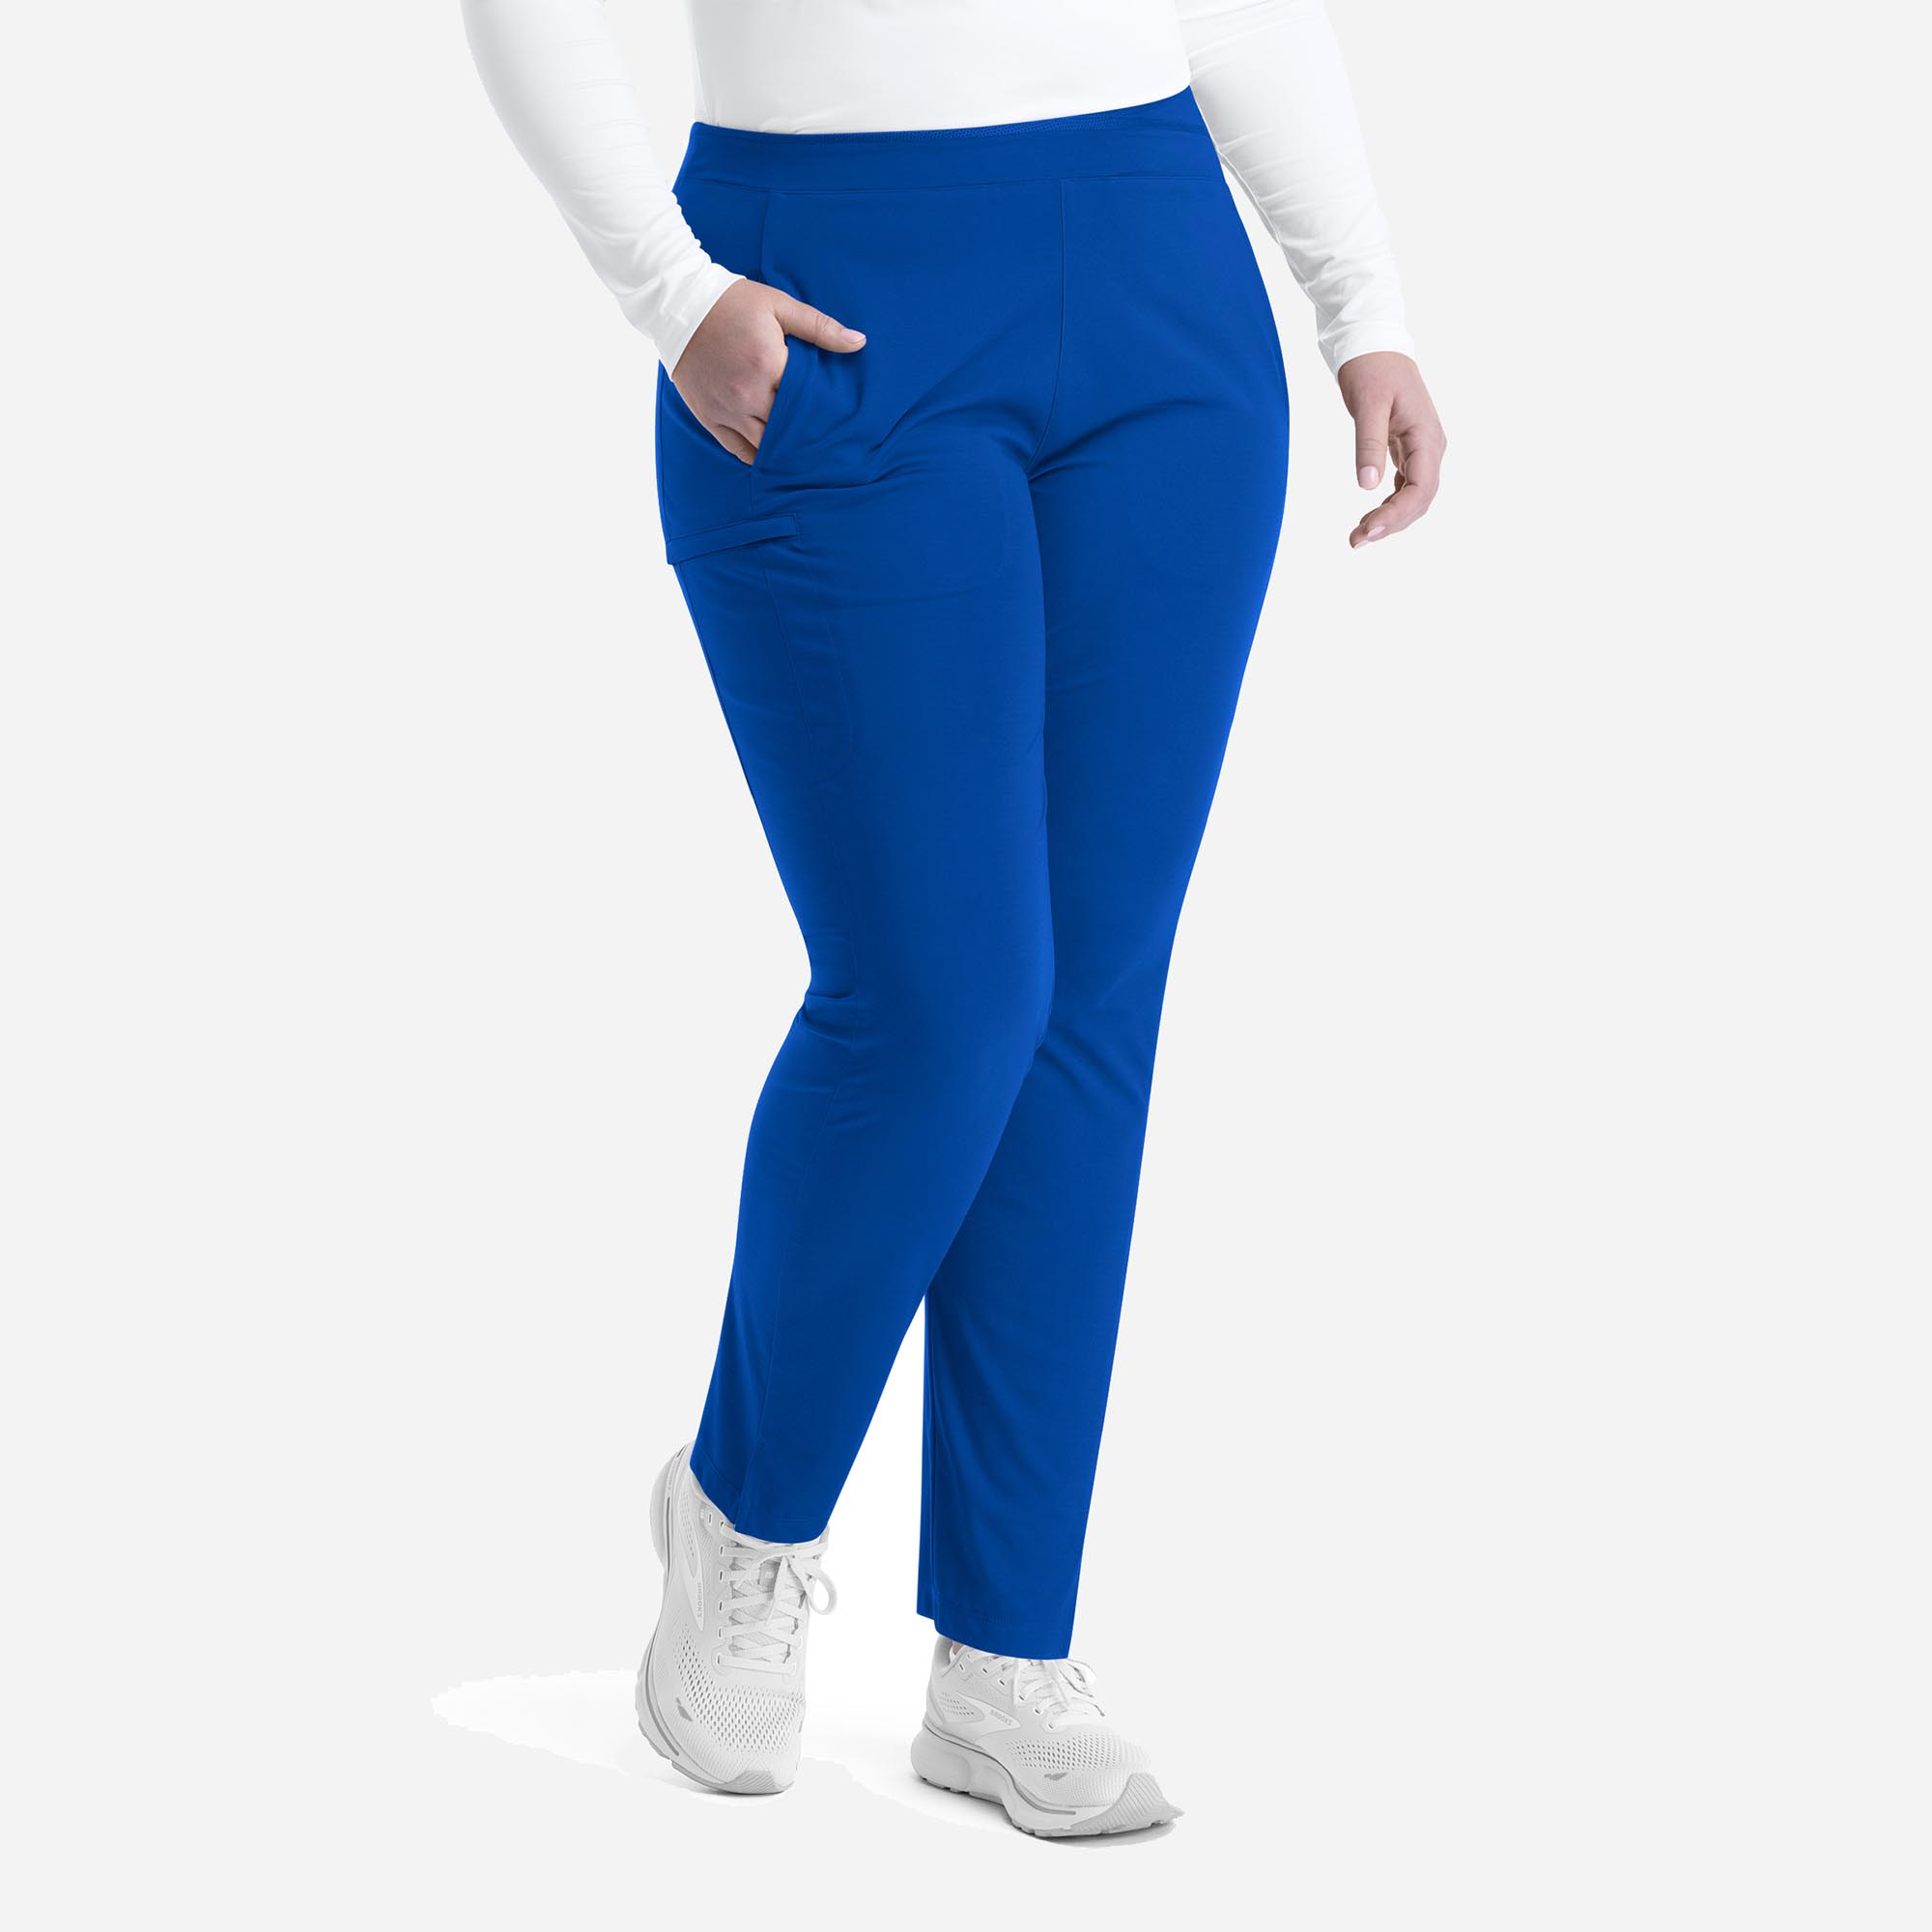 EVANS Plus Size Navy Blue Tapered Joggers